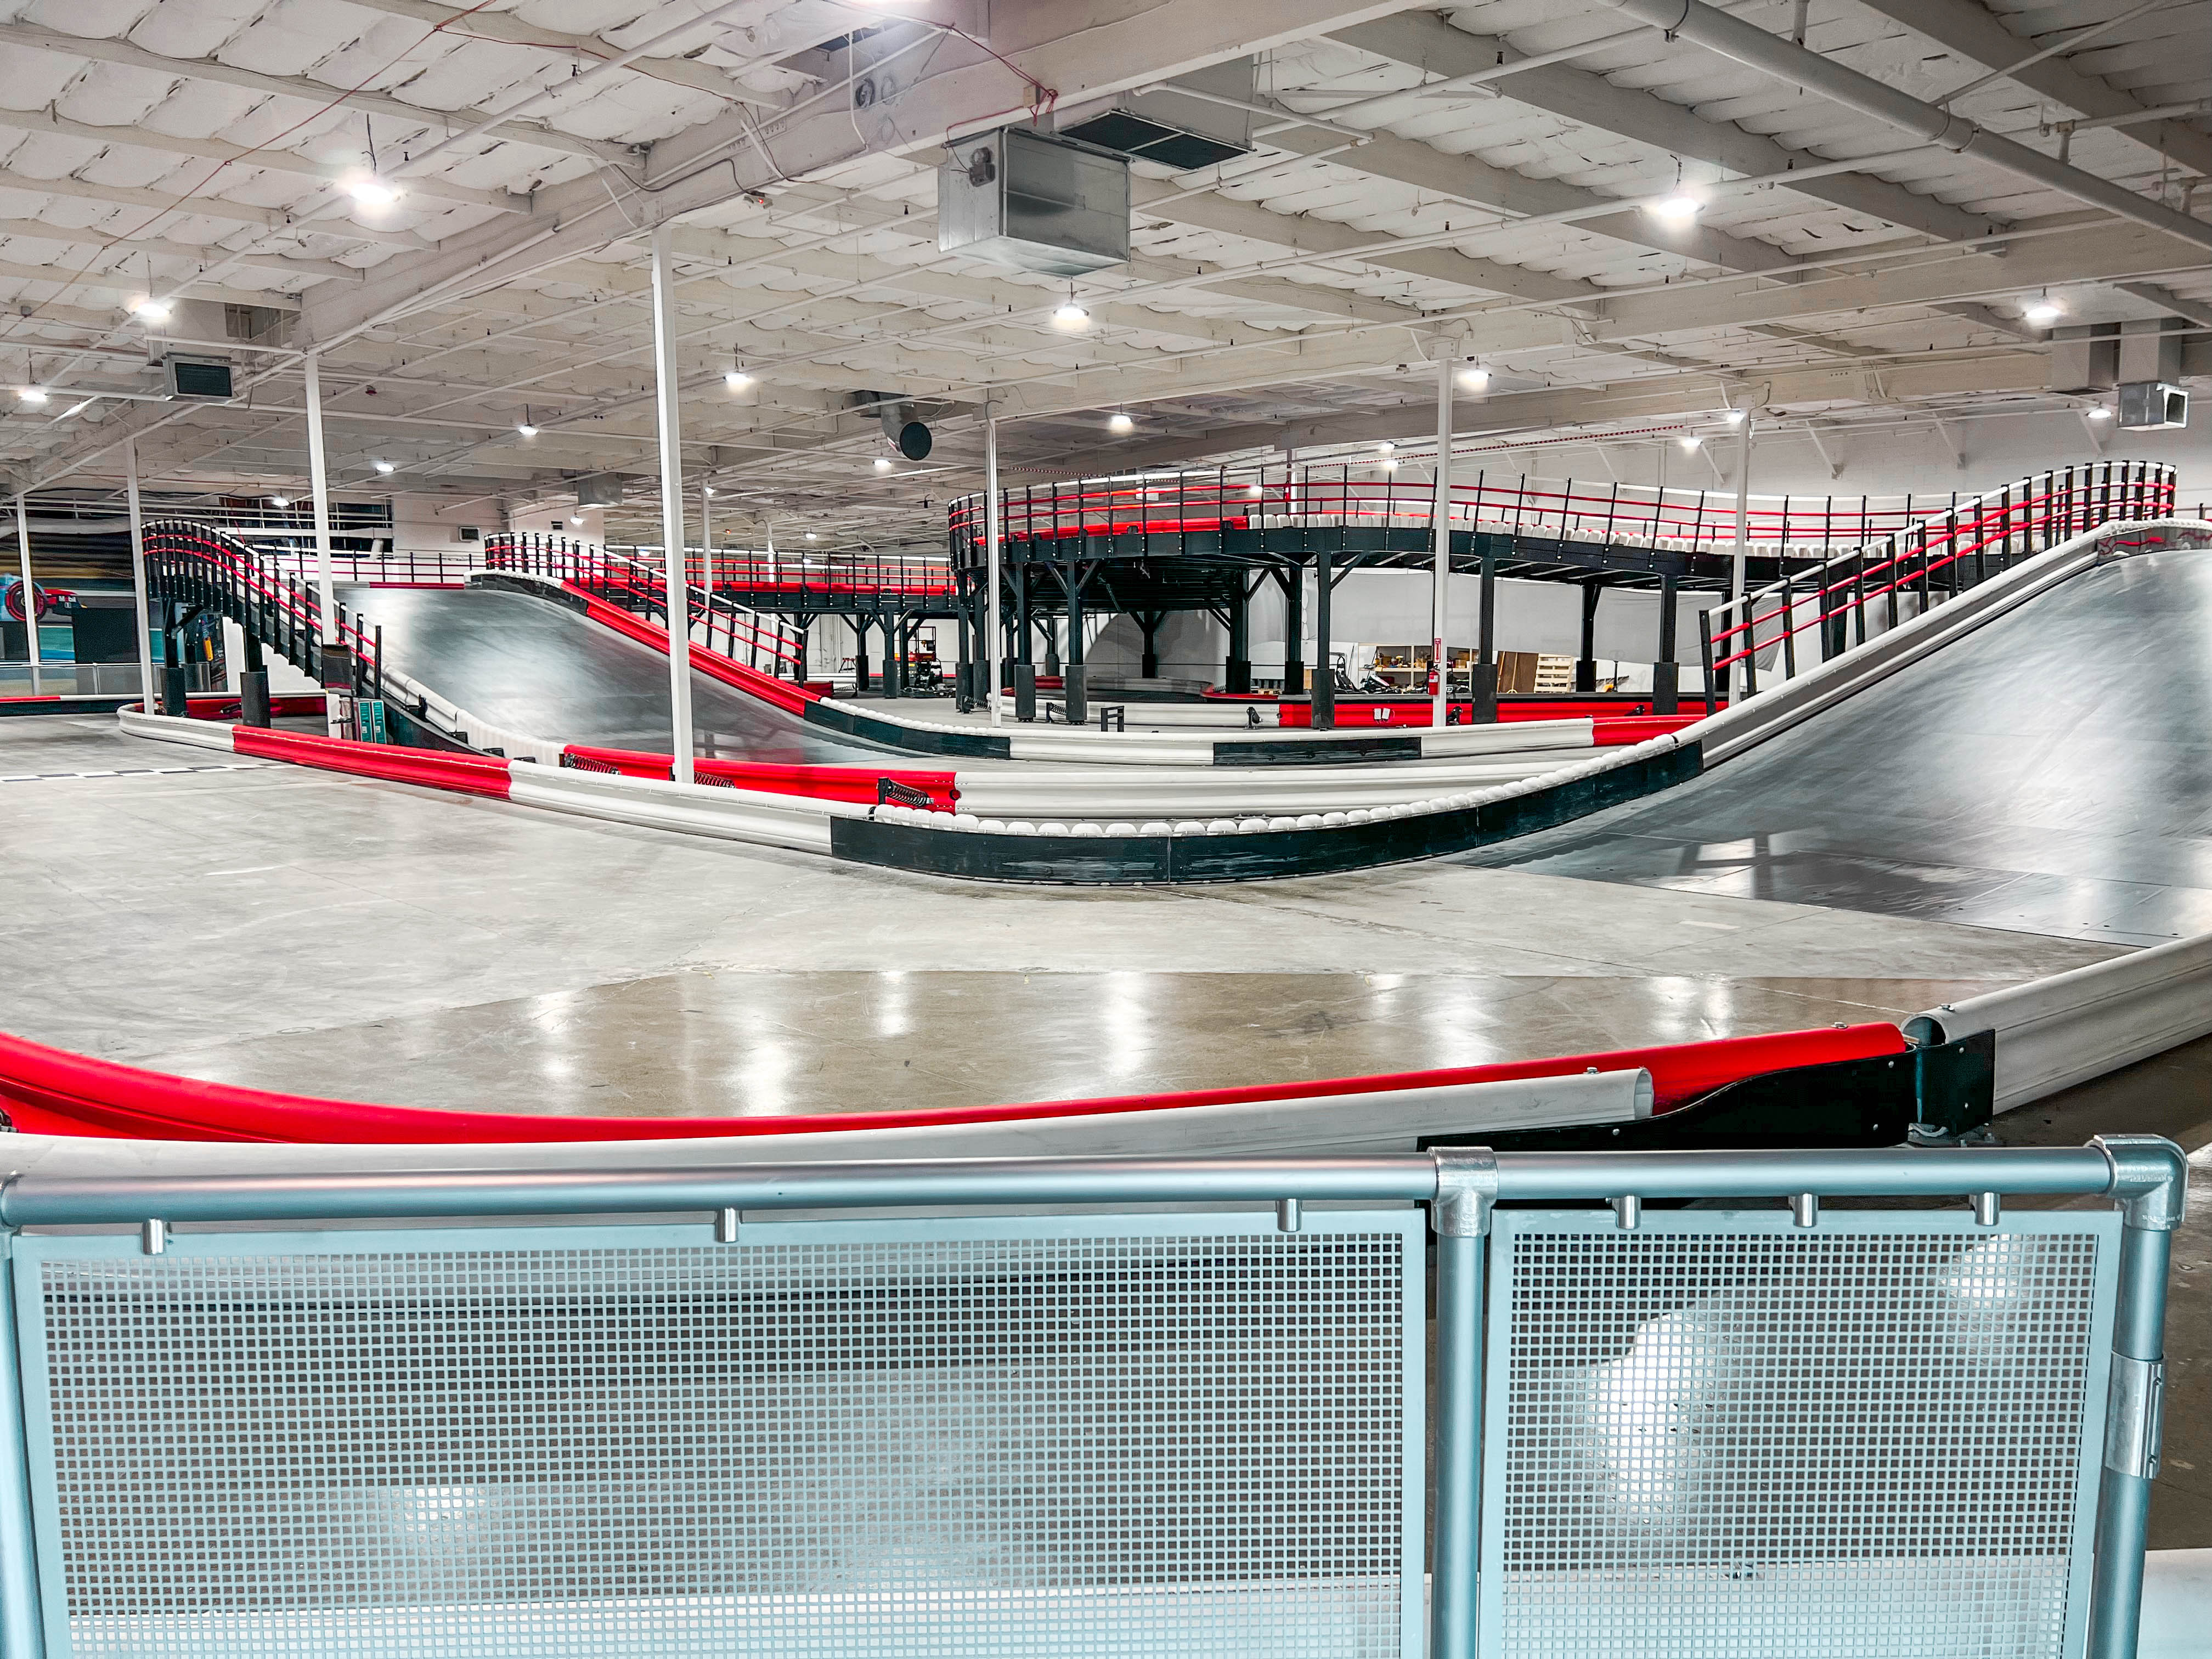 K1 Speed Fairfield is the very first indoor go kart track with elevation in California